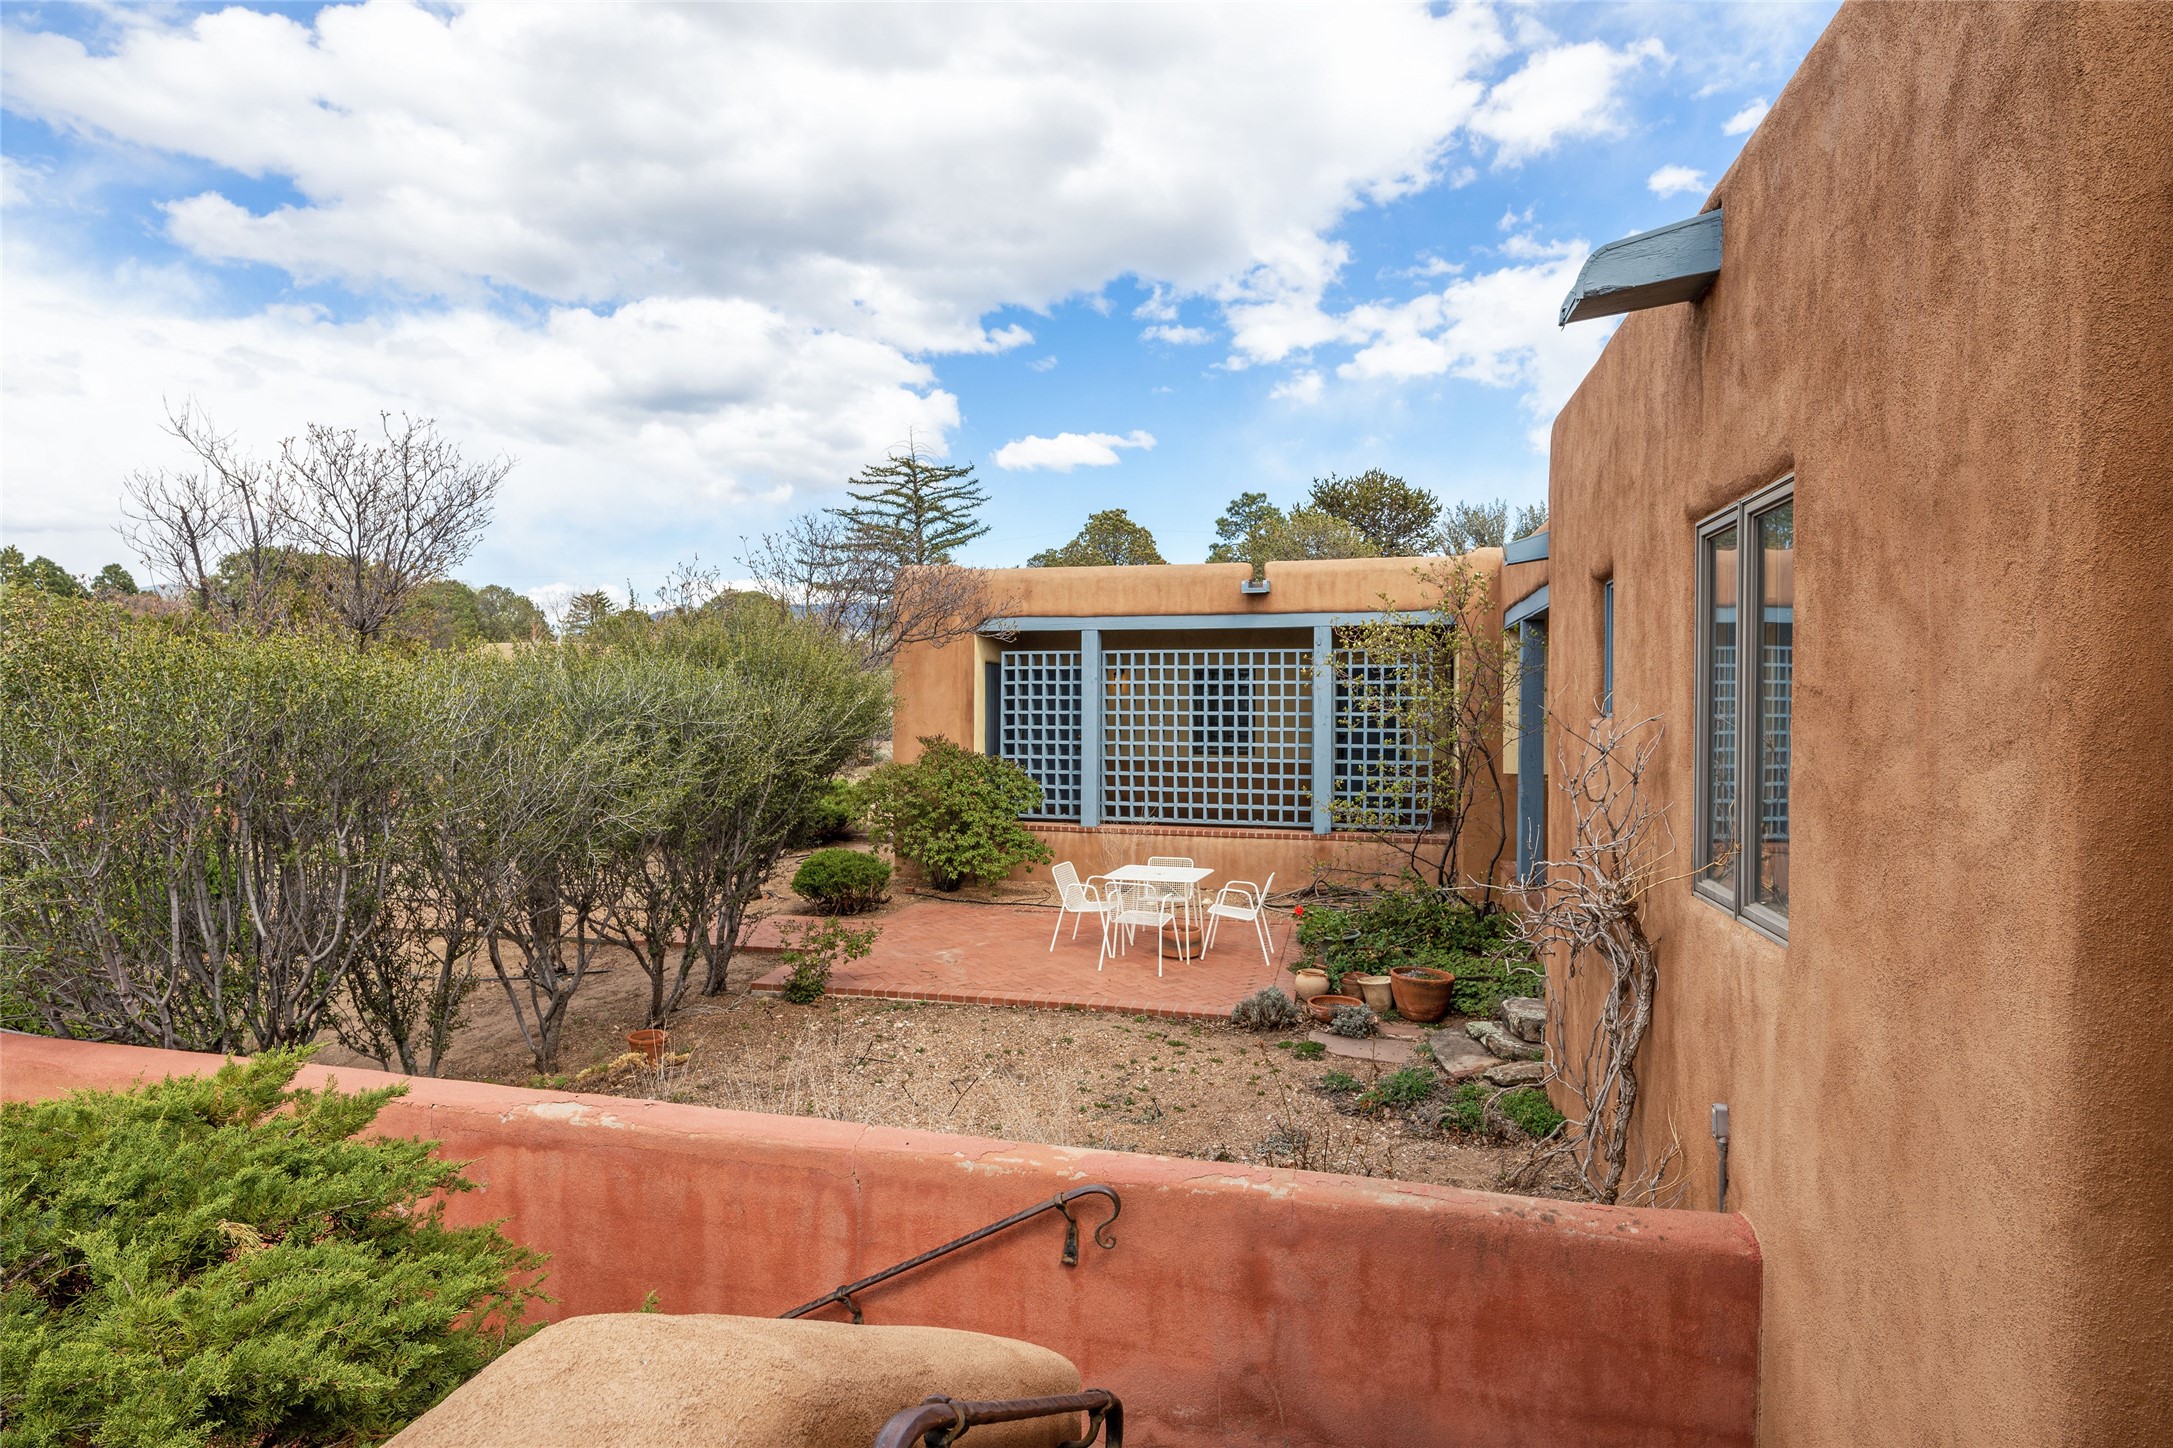 234 W San Mateo, Santa Fe, New Mexico 87505, 3 Bedrooms Bedrooms, ,3 BathroomsBathrooms,Residential,For Sale,234 W San Mateo,202336518